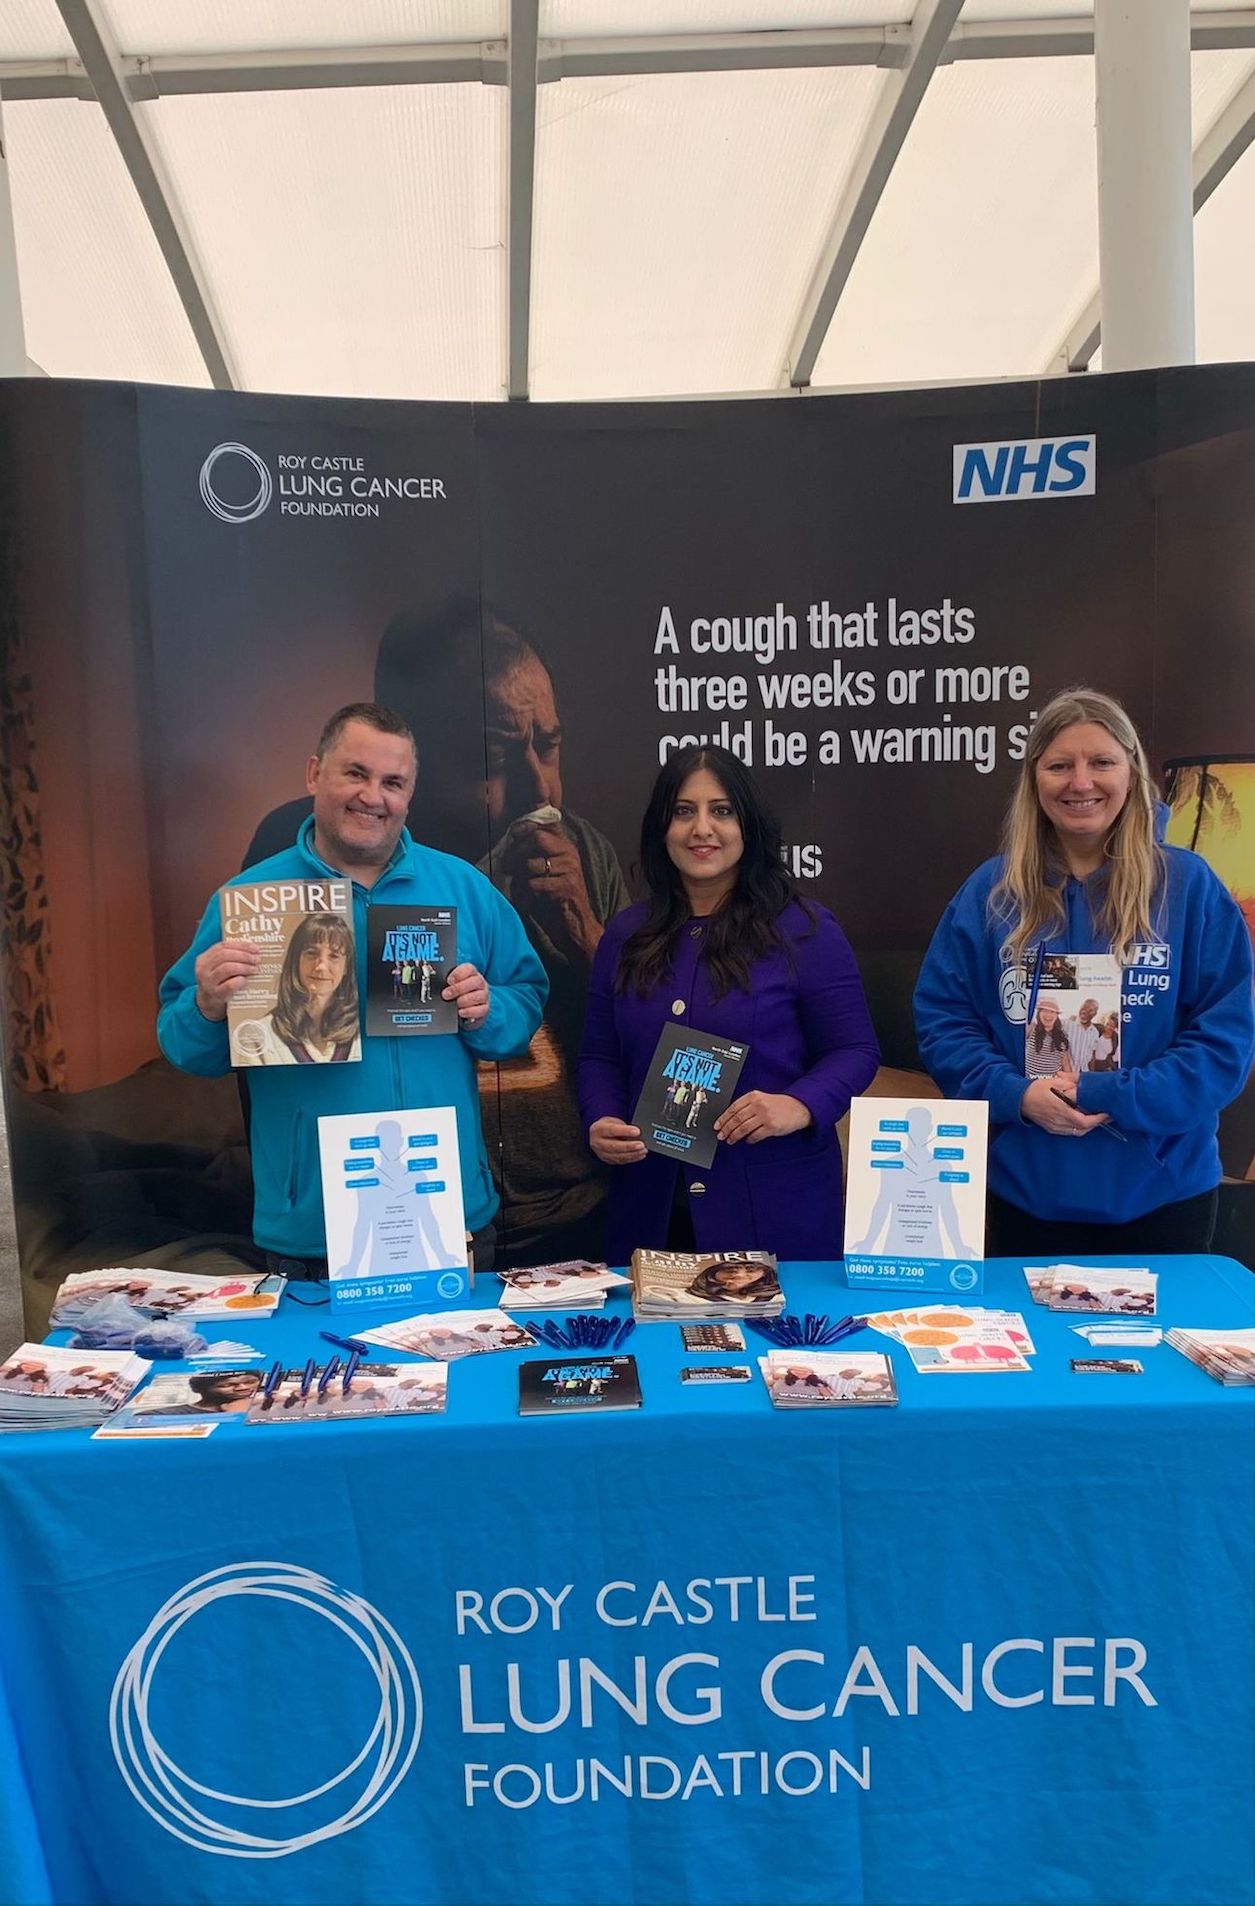 Image of three people standing behind a desk holding up leaflets which have cancer information on them. The banner on the table has the words "Roy Castle Lung Cancer Foundation' on it.